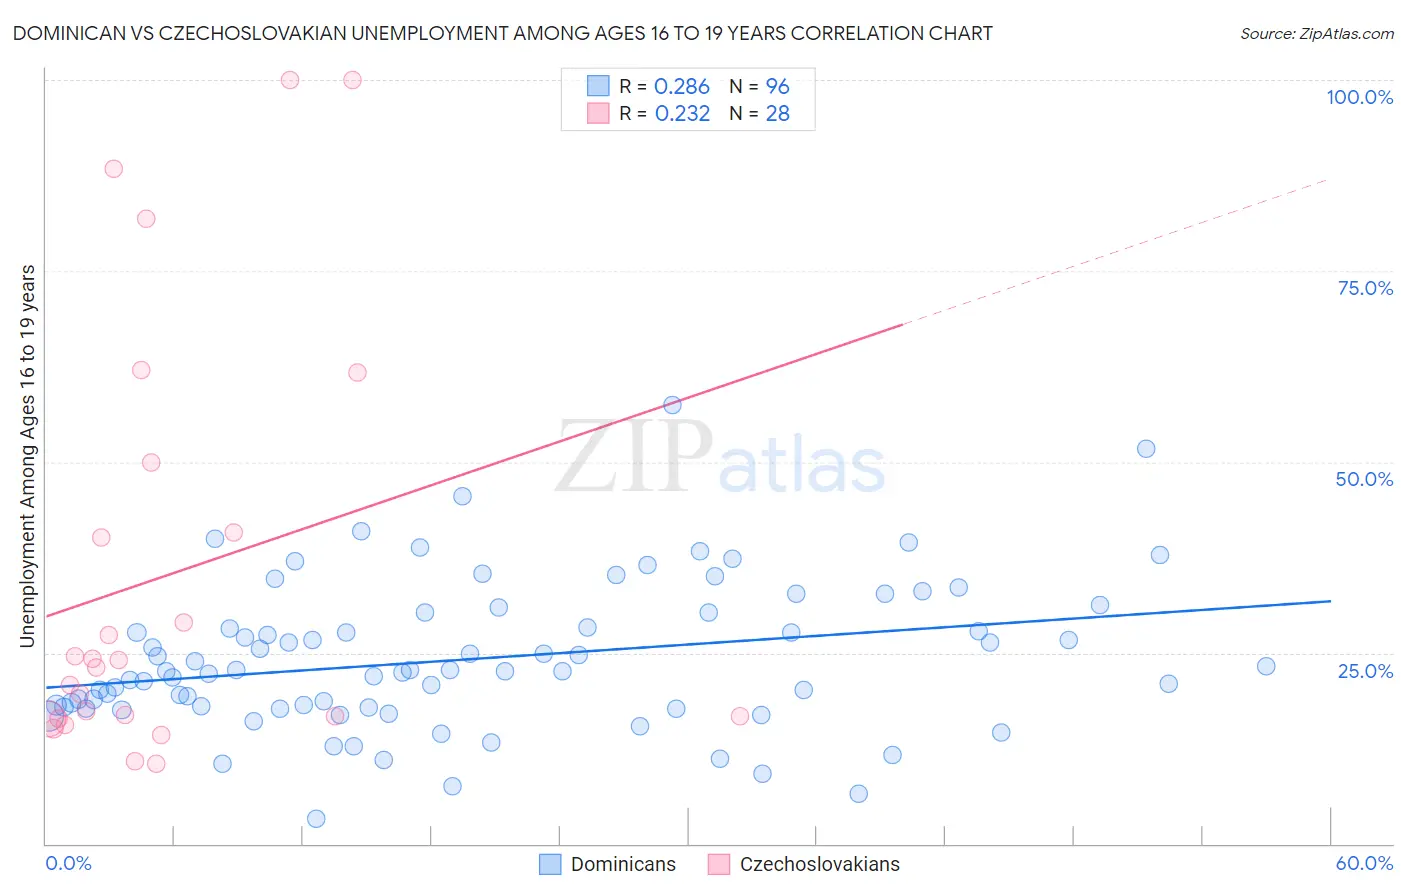 Dominican vs Czechoslovakian Unemployment Among Ages 16 to 19 years